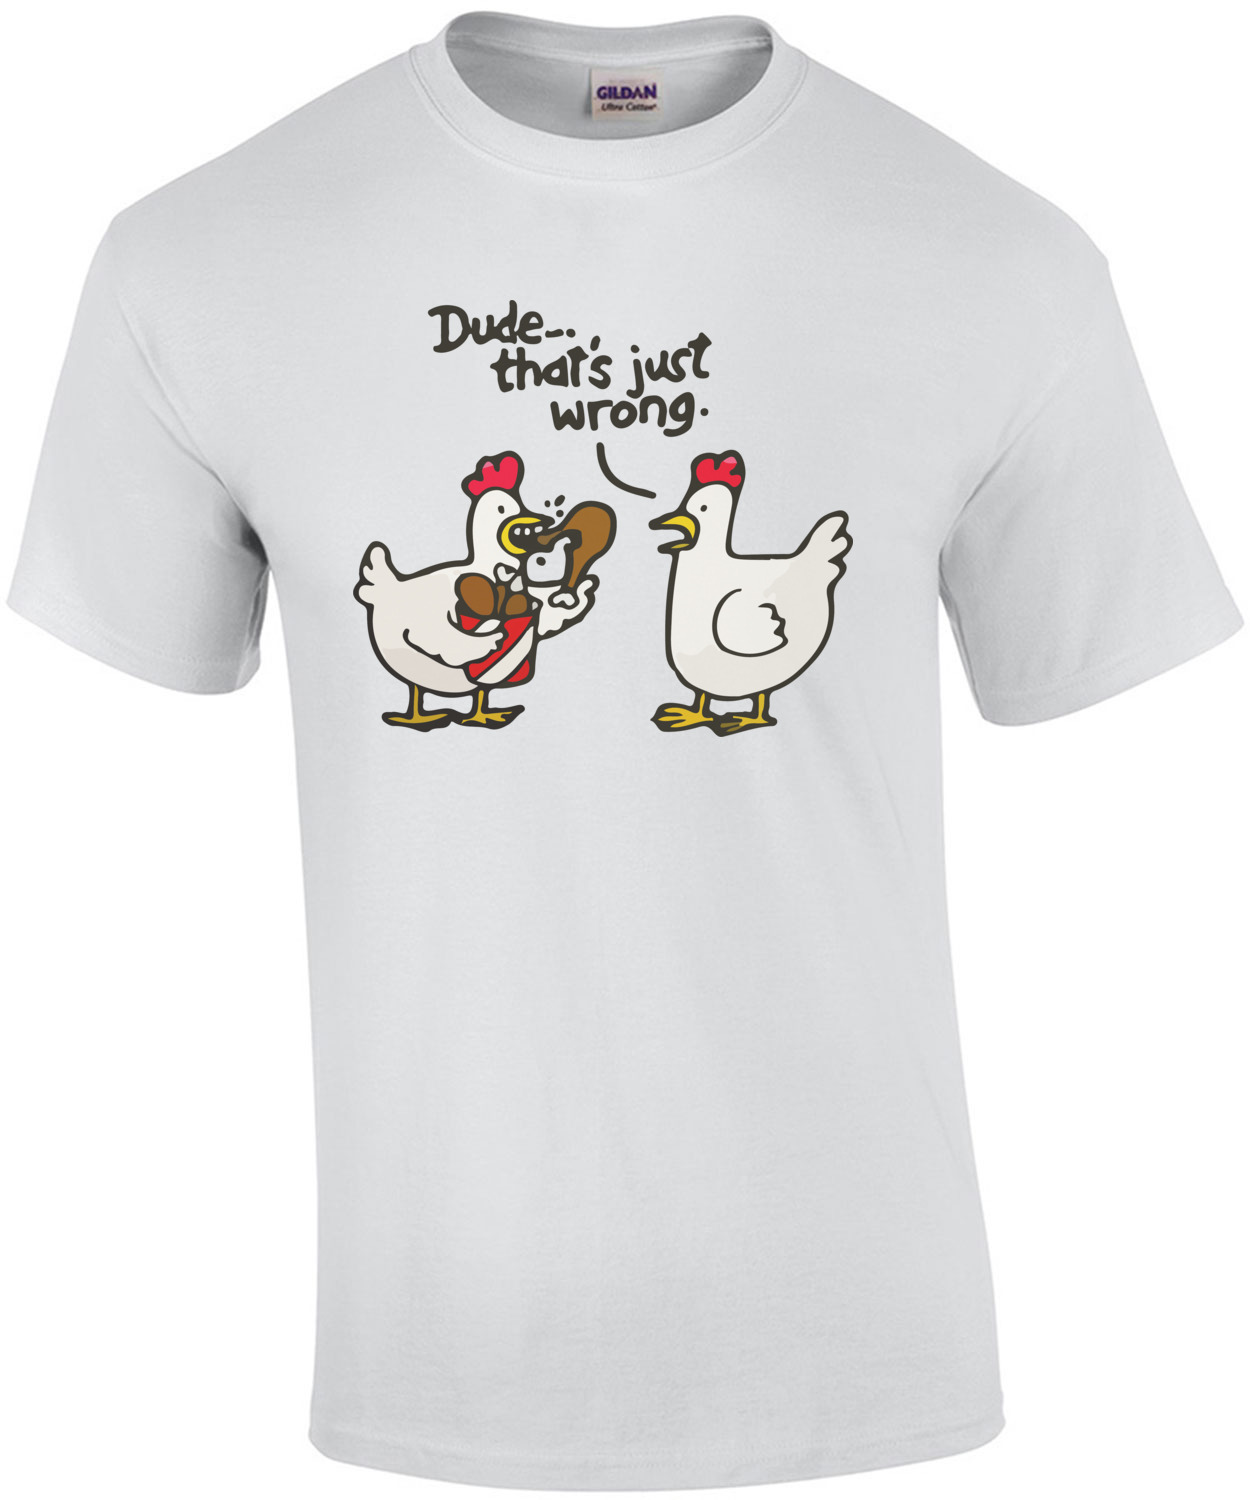 Dude, that's just wrong. Funny Chicken T-Shirt shirt